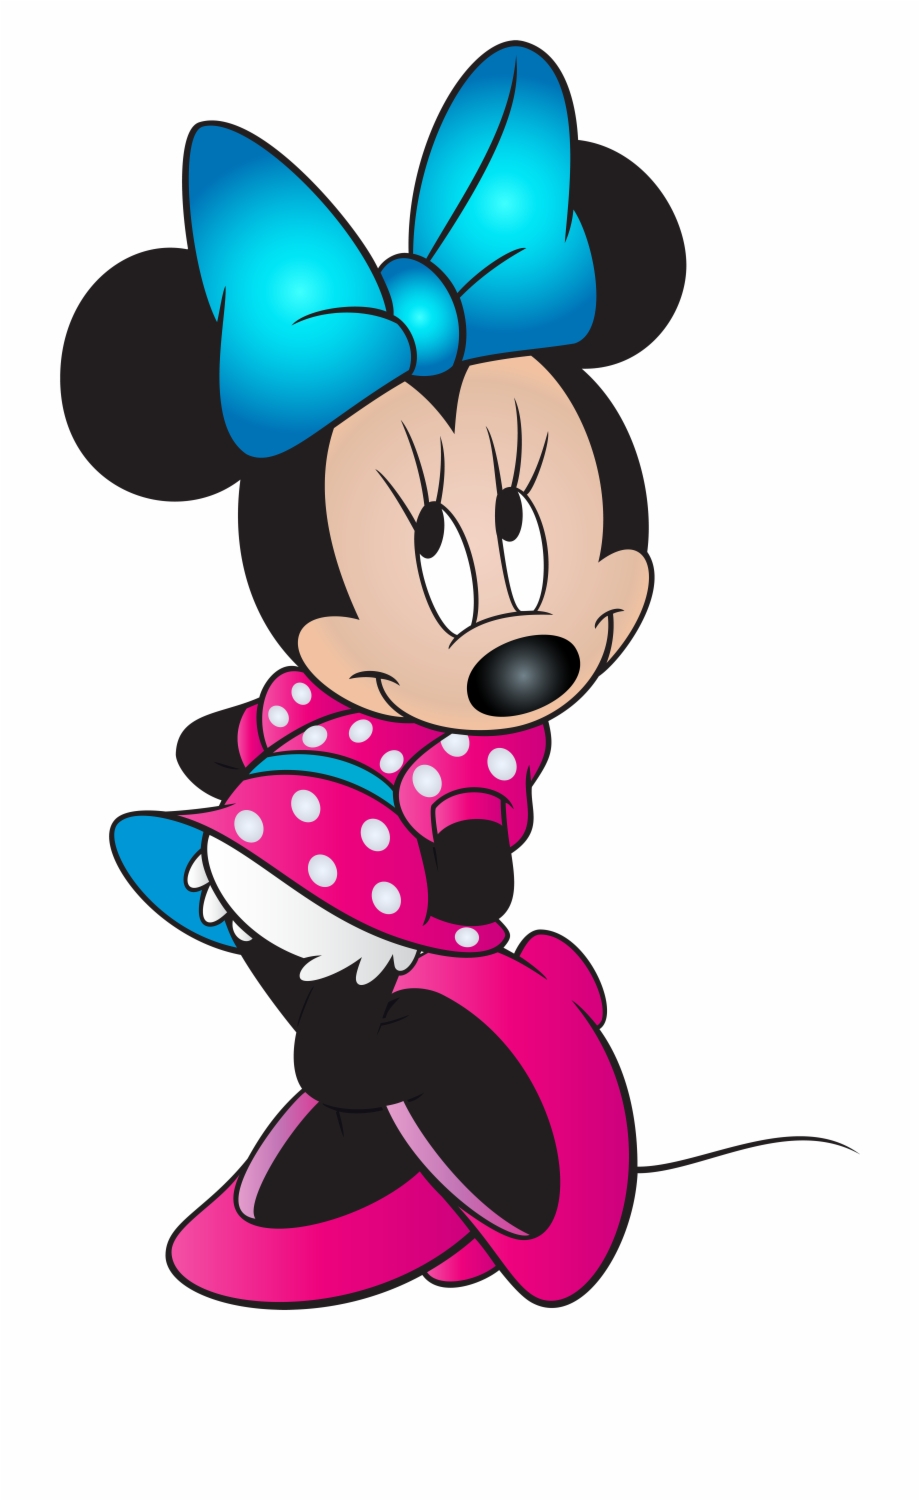 Mickey E Minnie Mouse Minnie Mouse Images Minnie